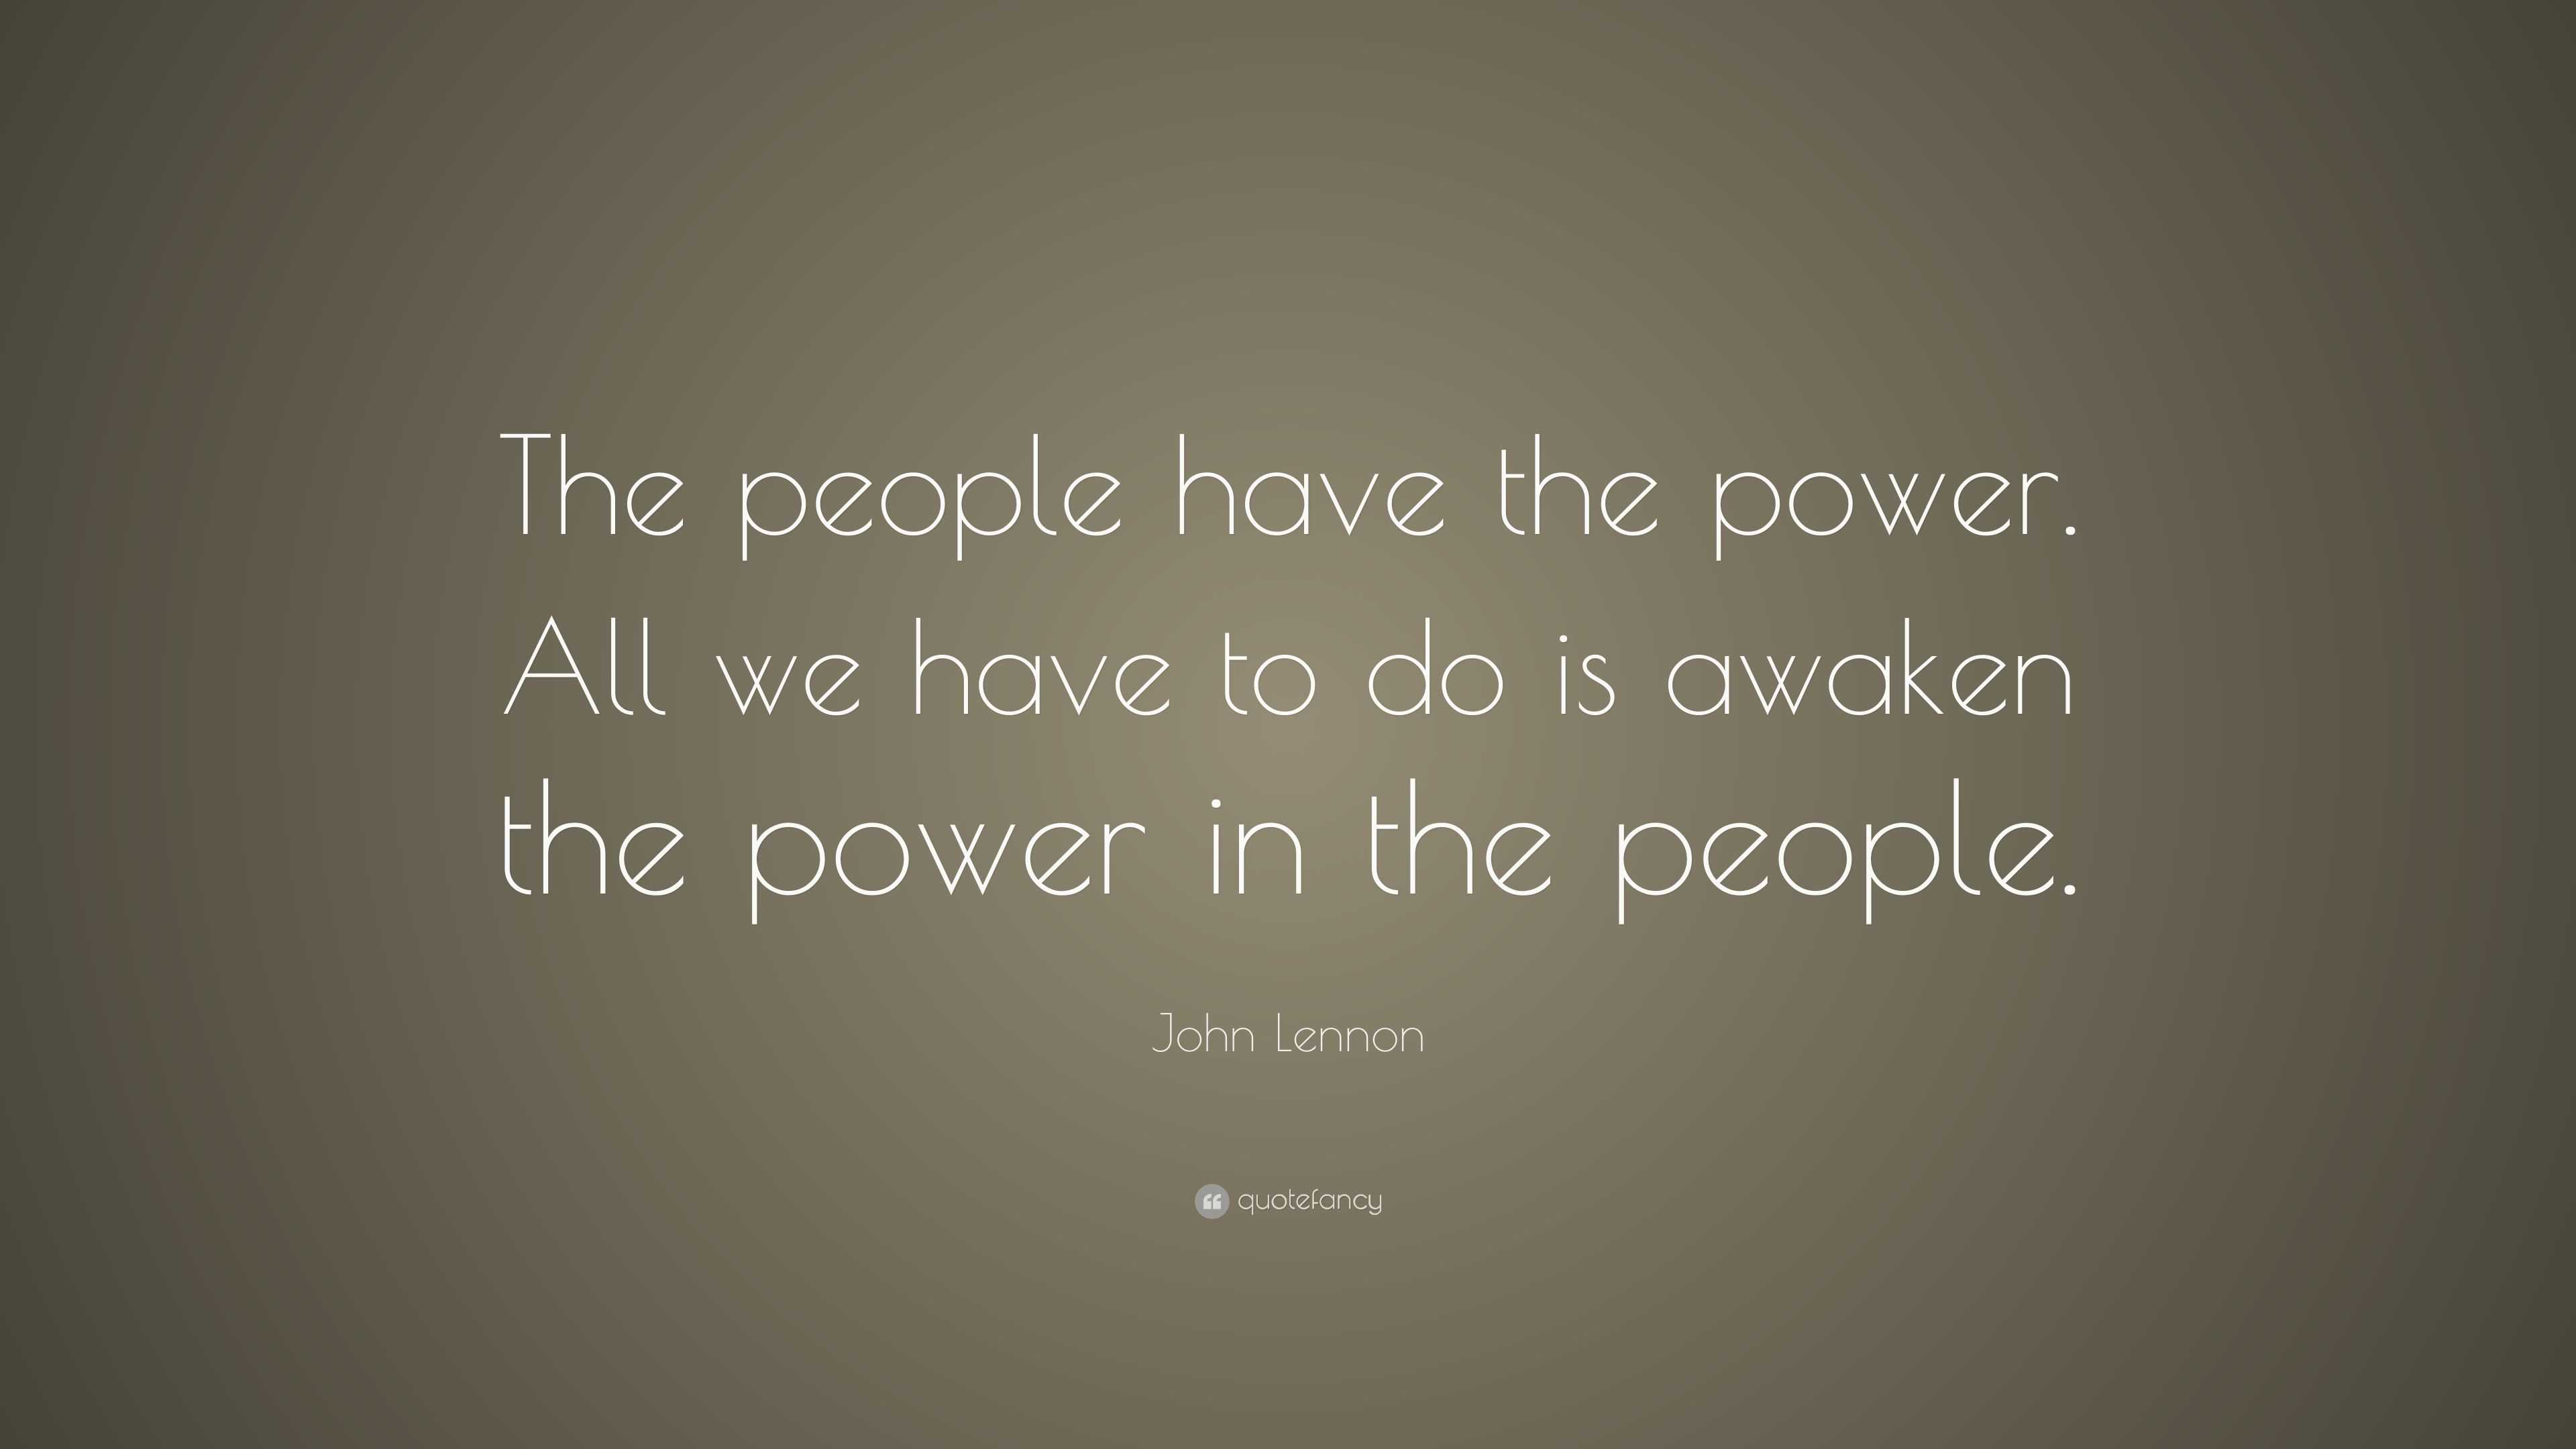 when did john lennon write power to the people